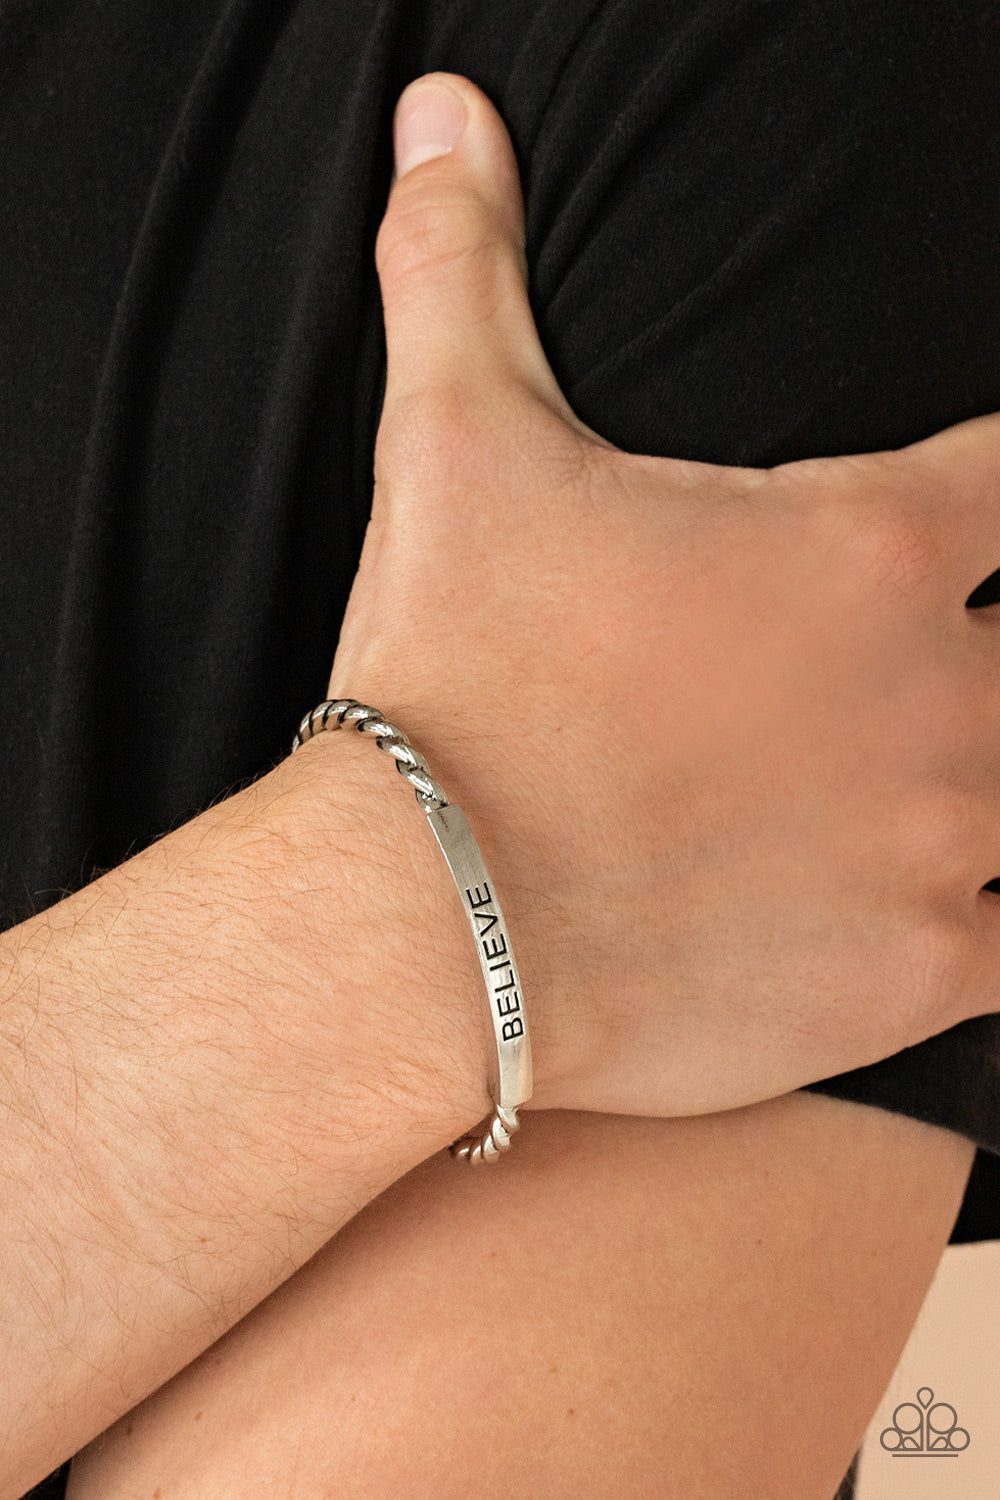 Keep Calm and Believe - Silver - Bracelets - Paparazzi Accessories